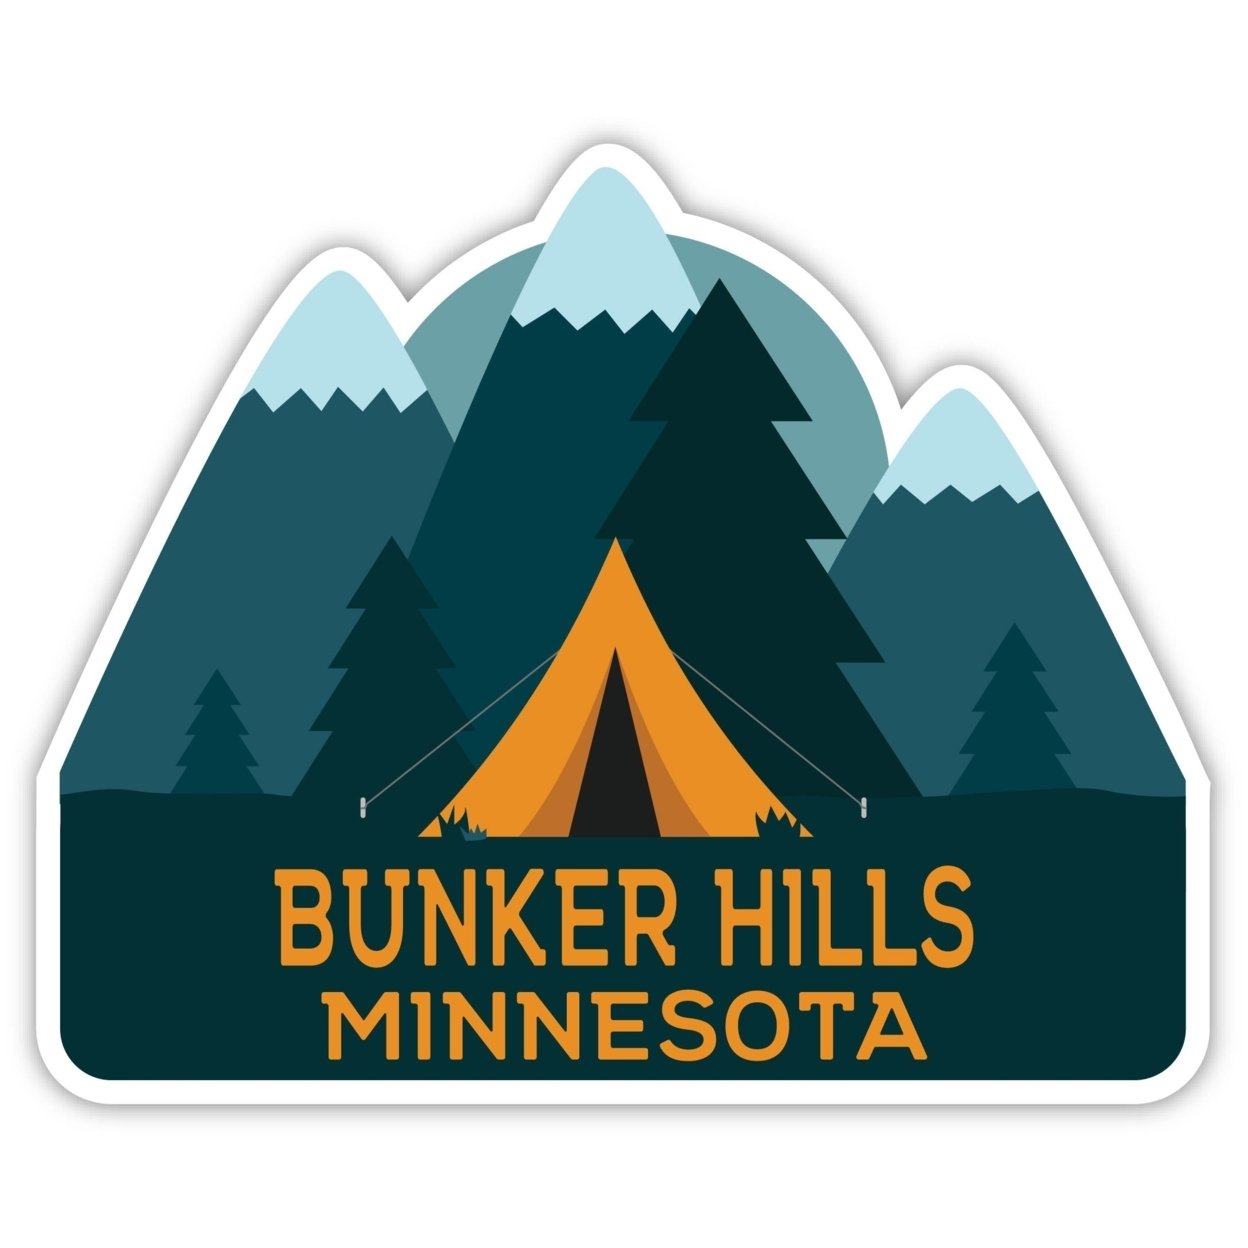 Bunker Hills Minnesota Souvenir Decorative Stickers (Choose Theme And Size) - 4-Pack, 8-Inch, Tent